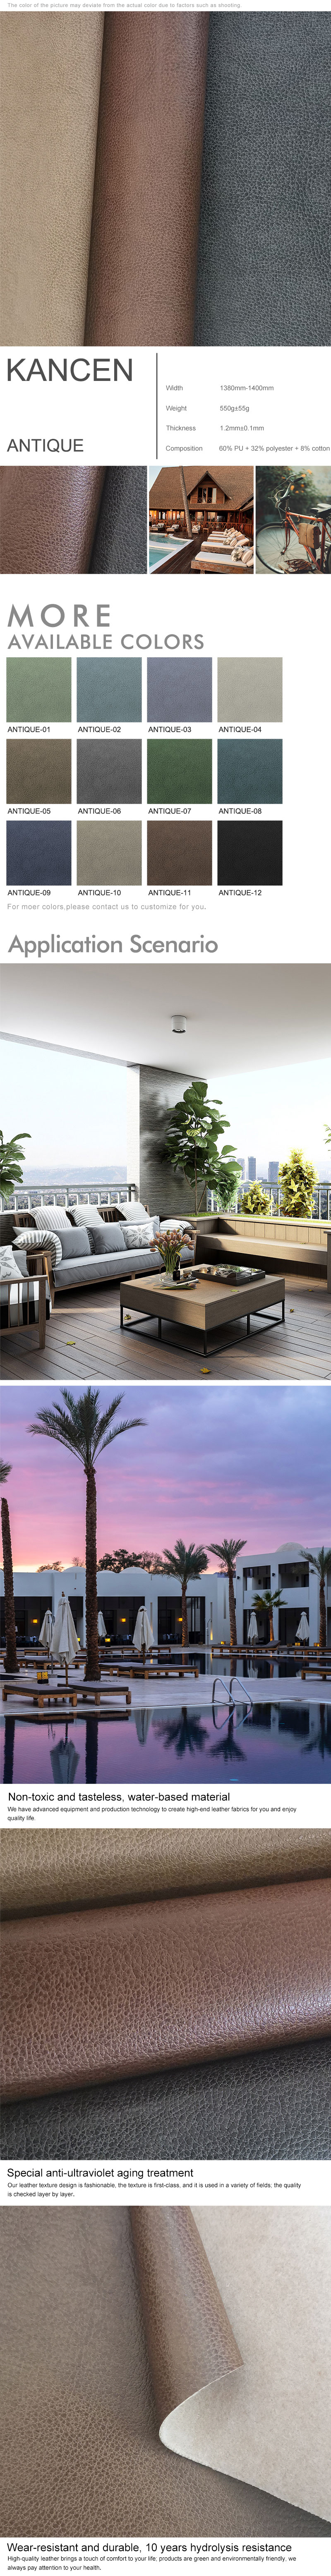 1400mm wide outdoor furniture leather | outdoor leather | leather - KANCEN